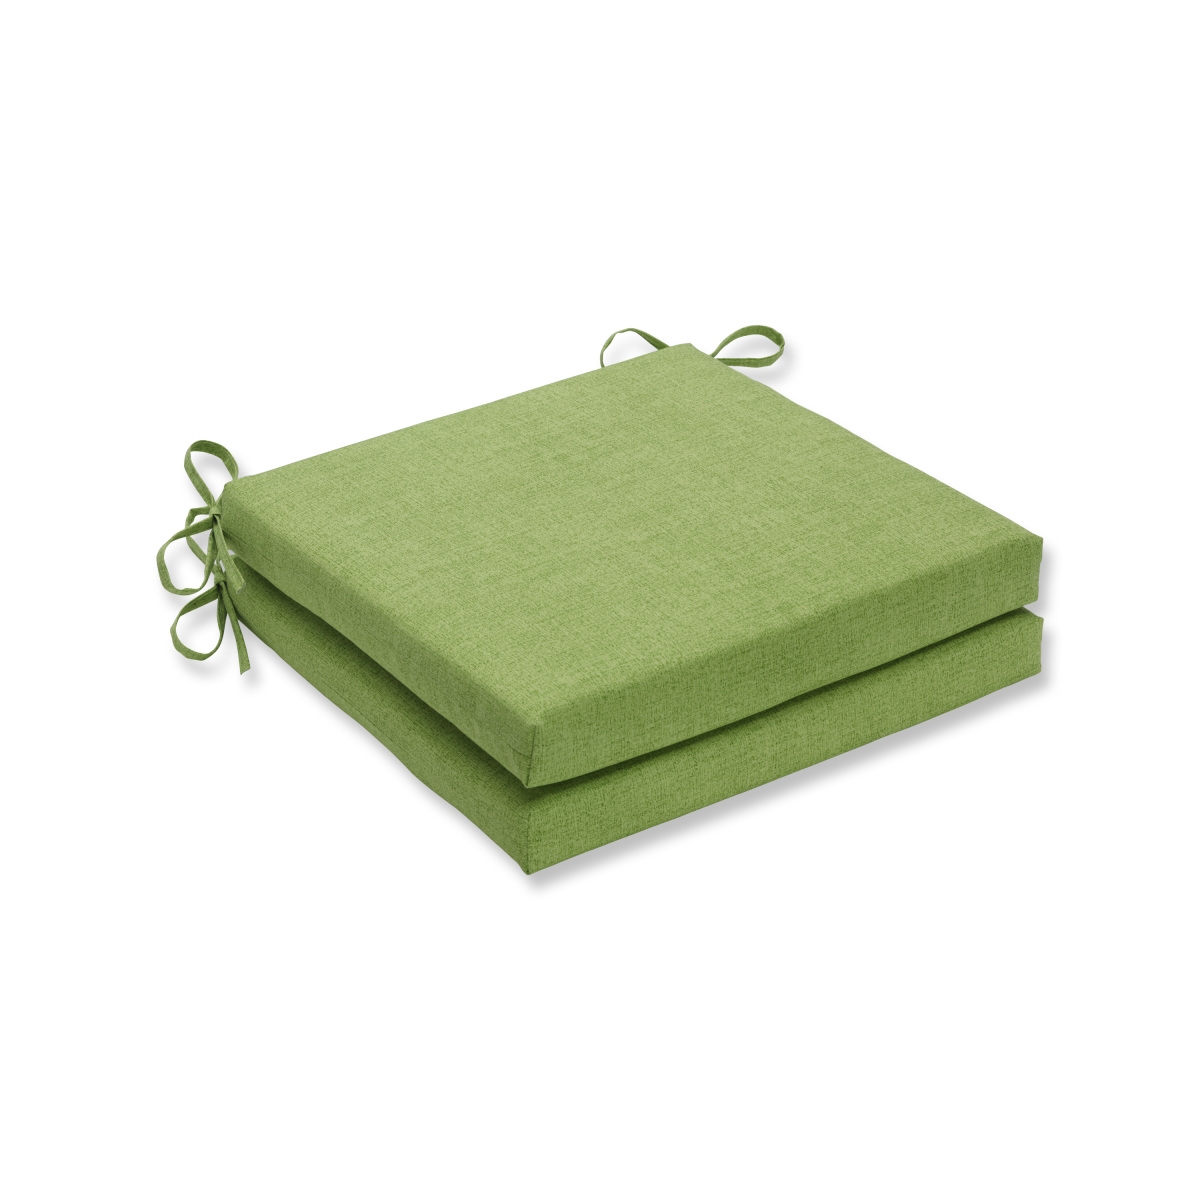 612492 20 X 20 X 3 In. Outdoor & Indoor Baja Linen Lime Squared Corners Seat Cushion, Green - Set Of 2